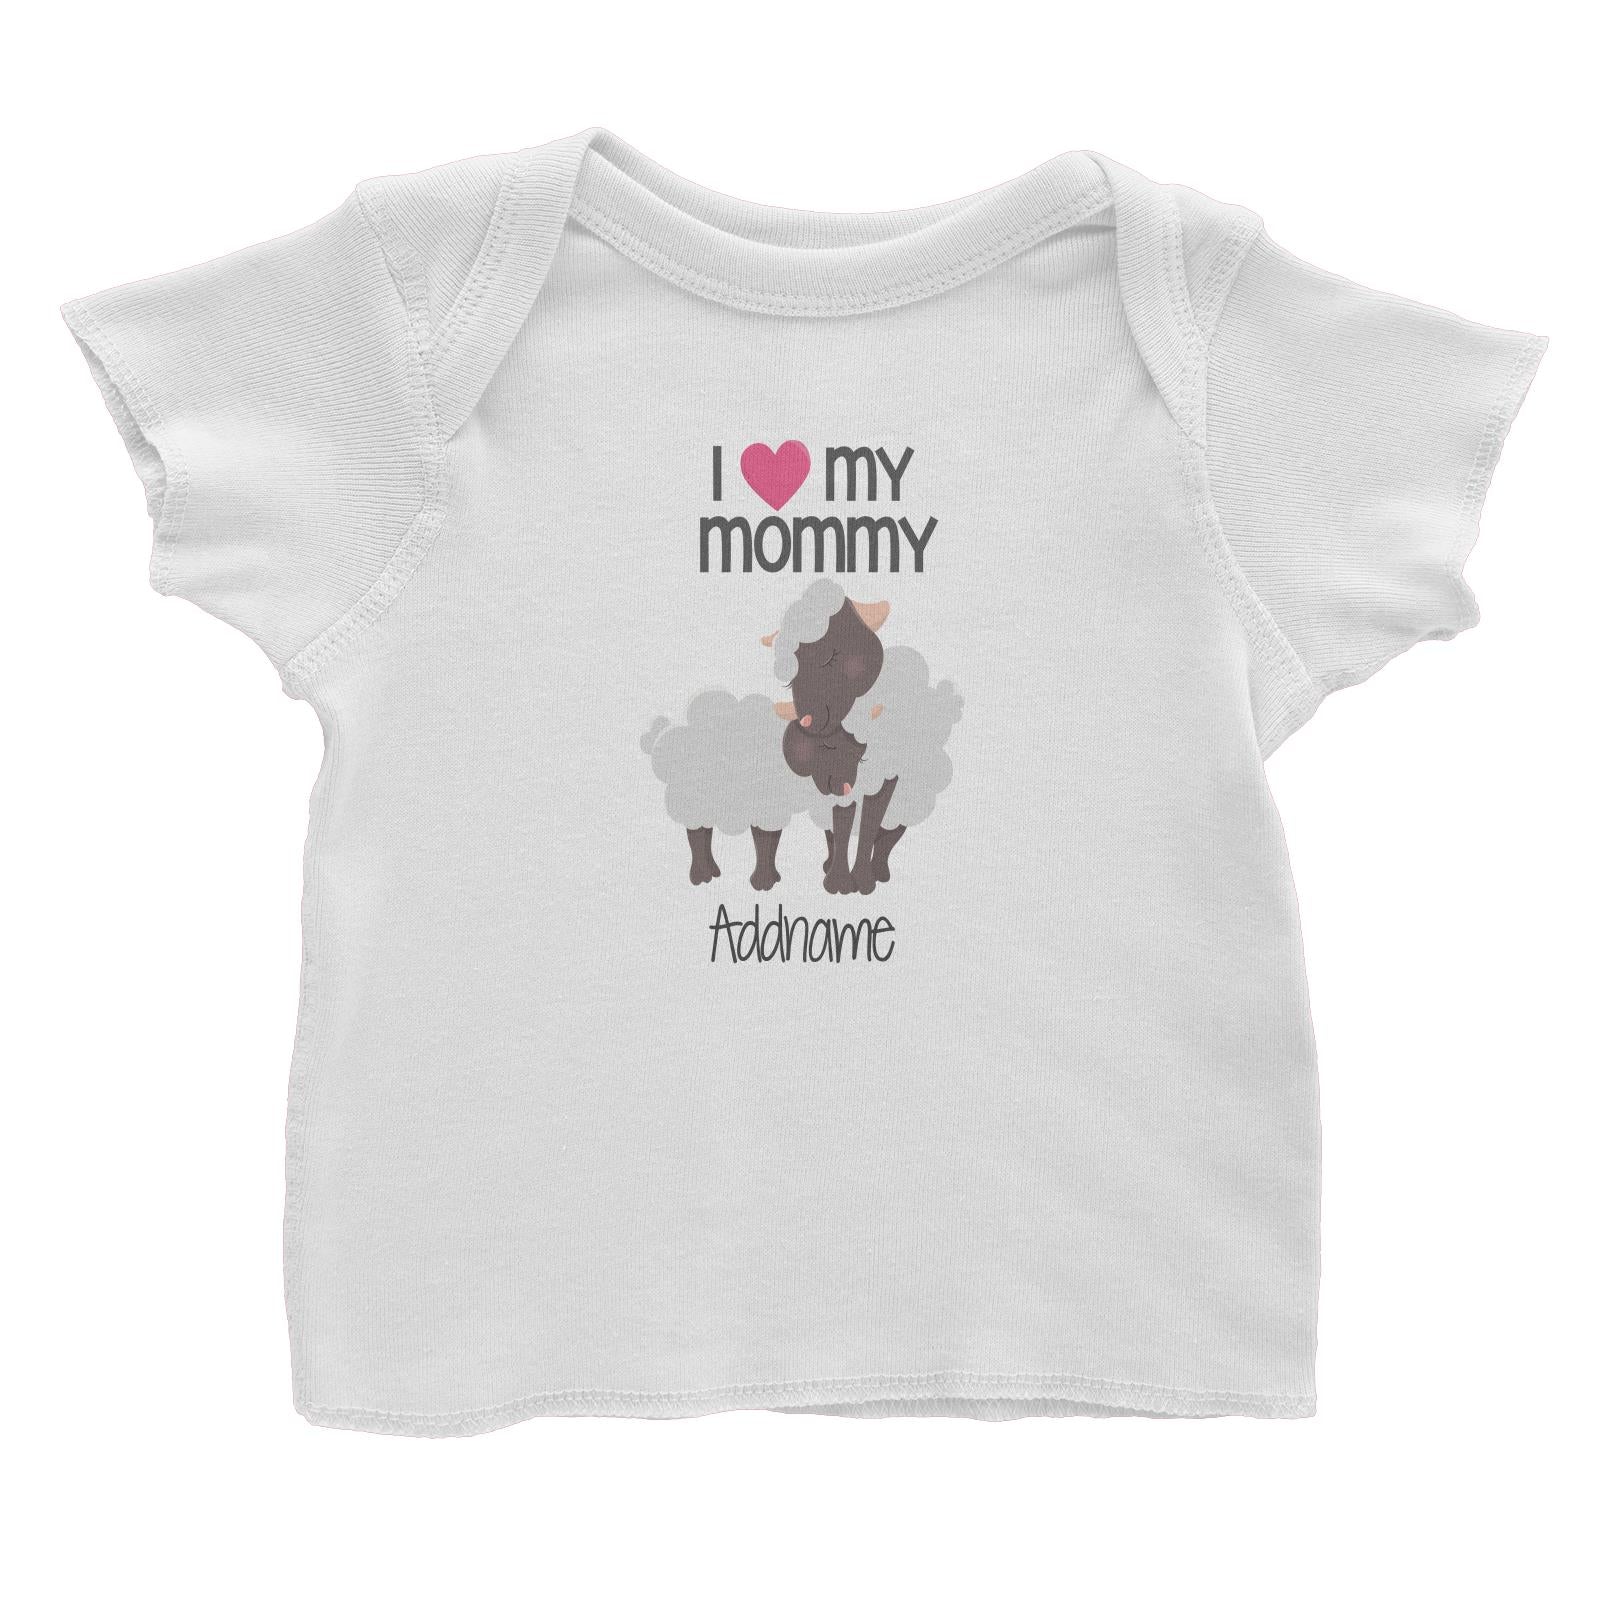 Animal &Loved Ones Sheep I Love My Mommy Addname Baby T-Shirt